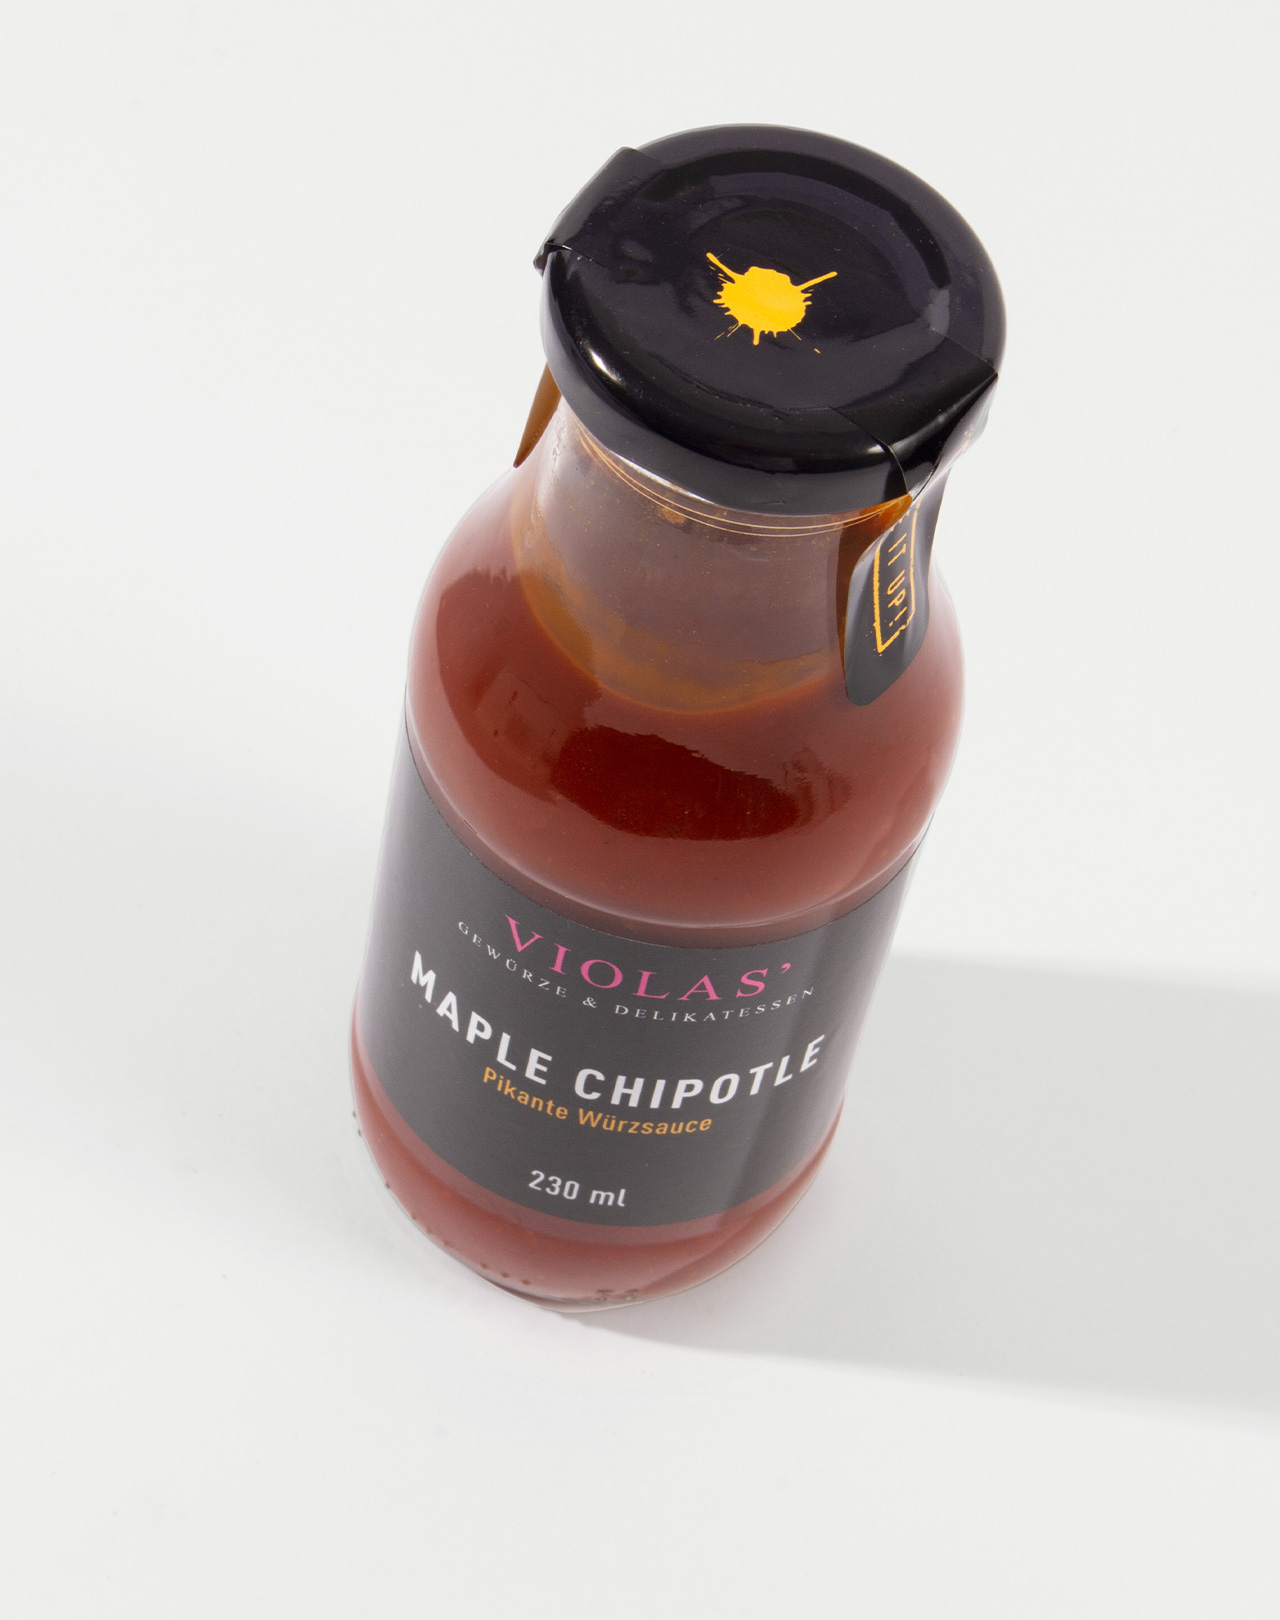 Sauce it up! Maple Chipotle